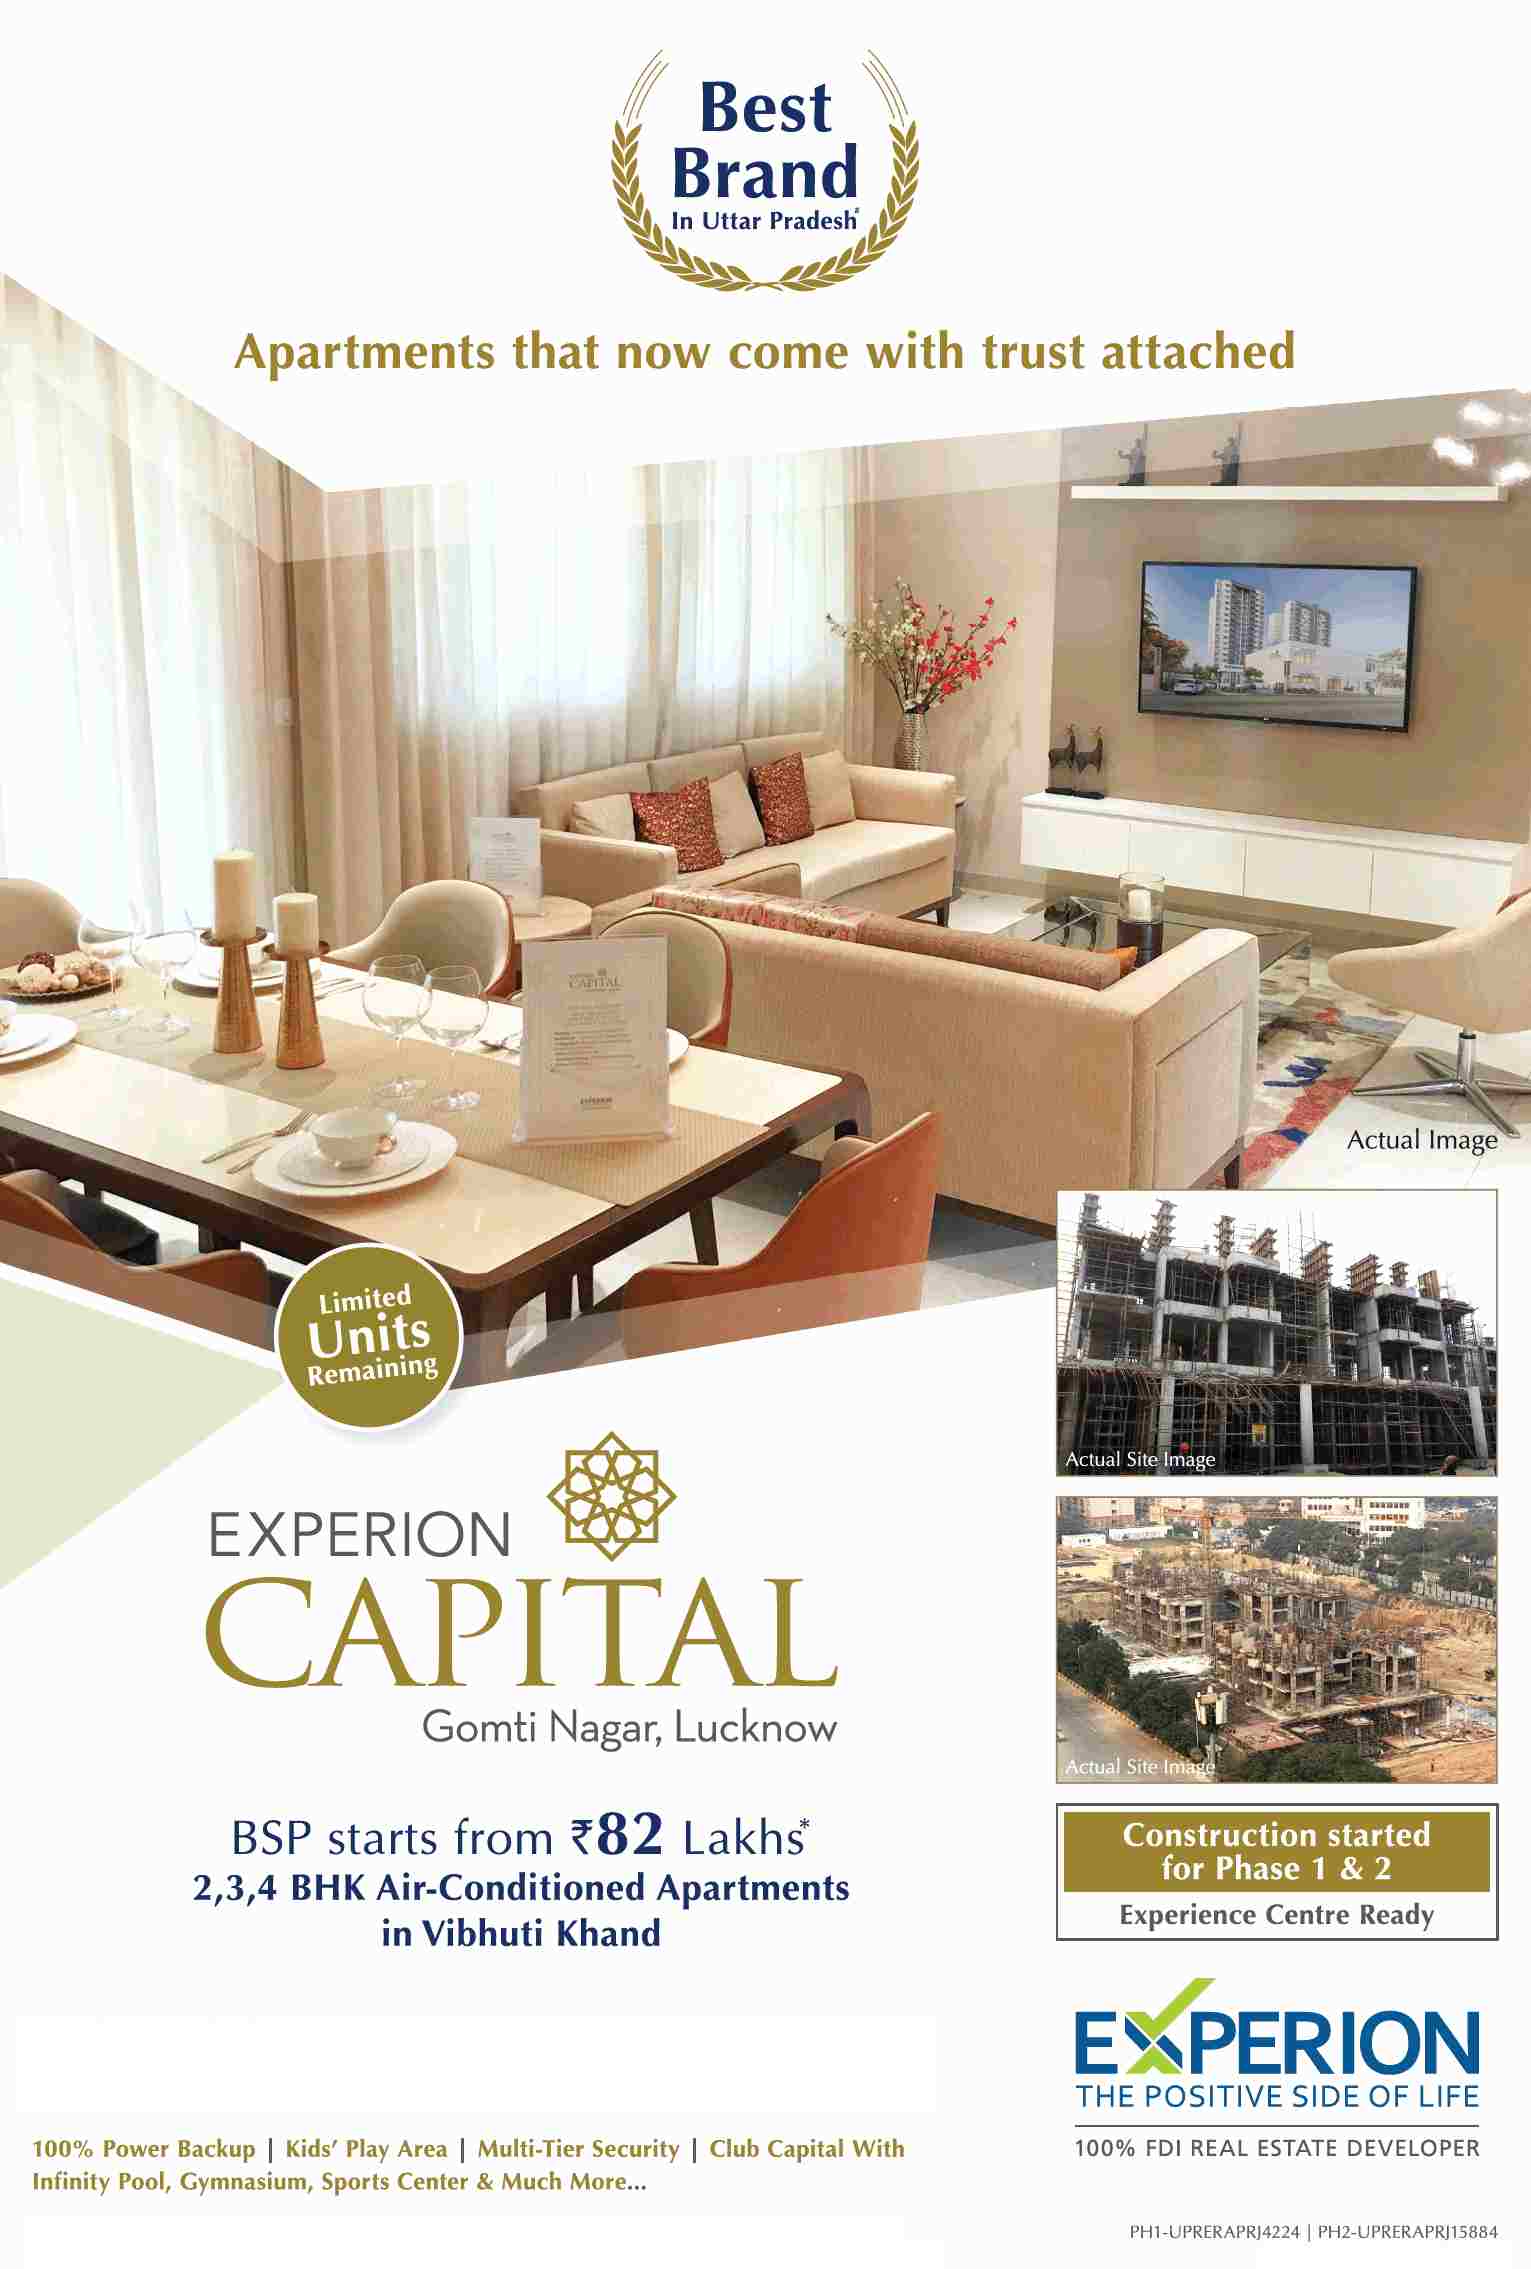 Book air-conditioned apartments @ 82 Lakhs at Experion Capital in Lucknow Update